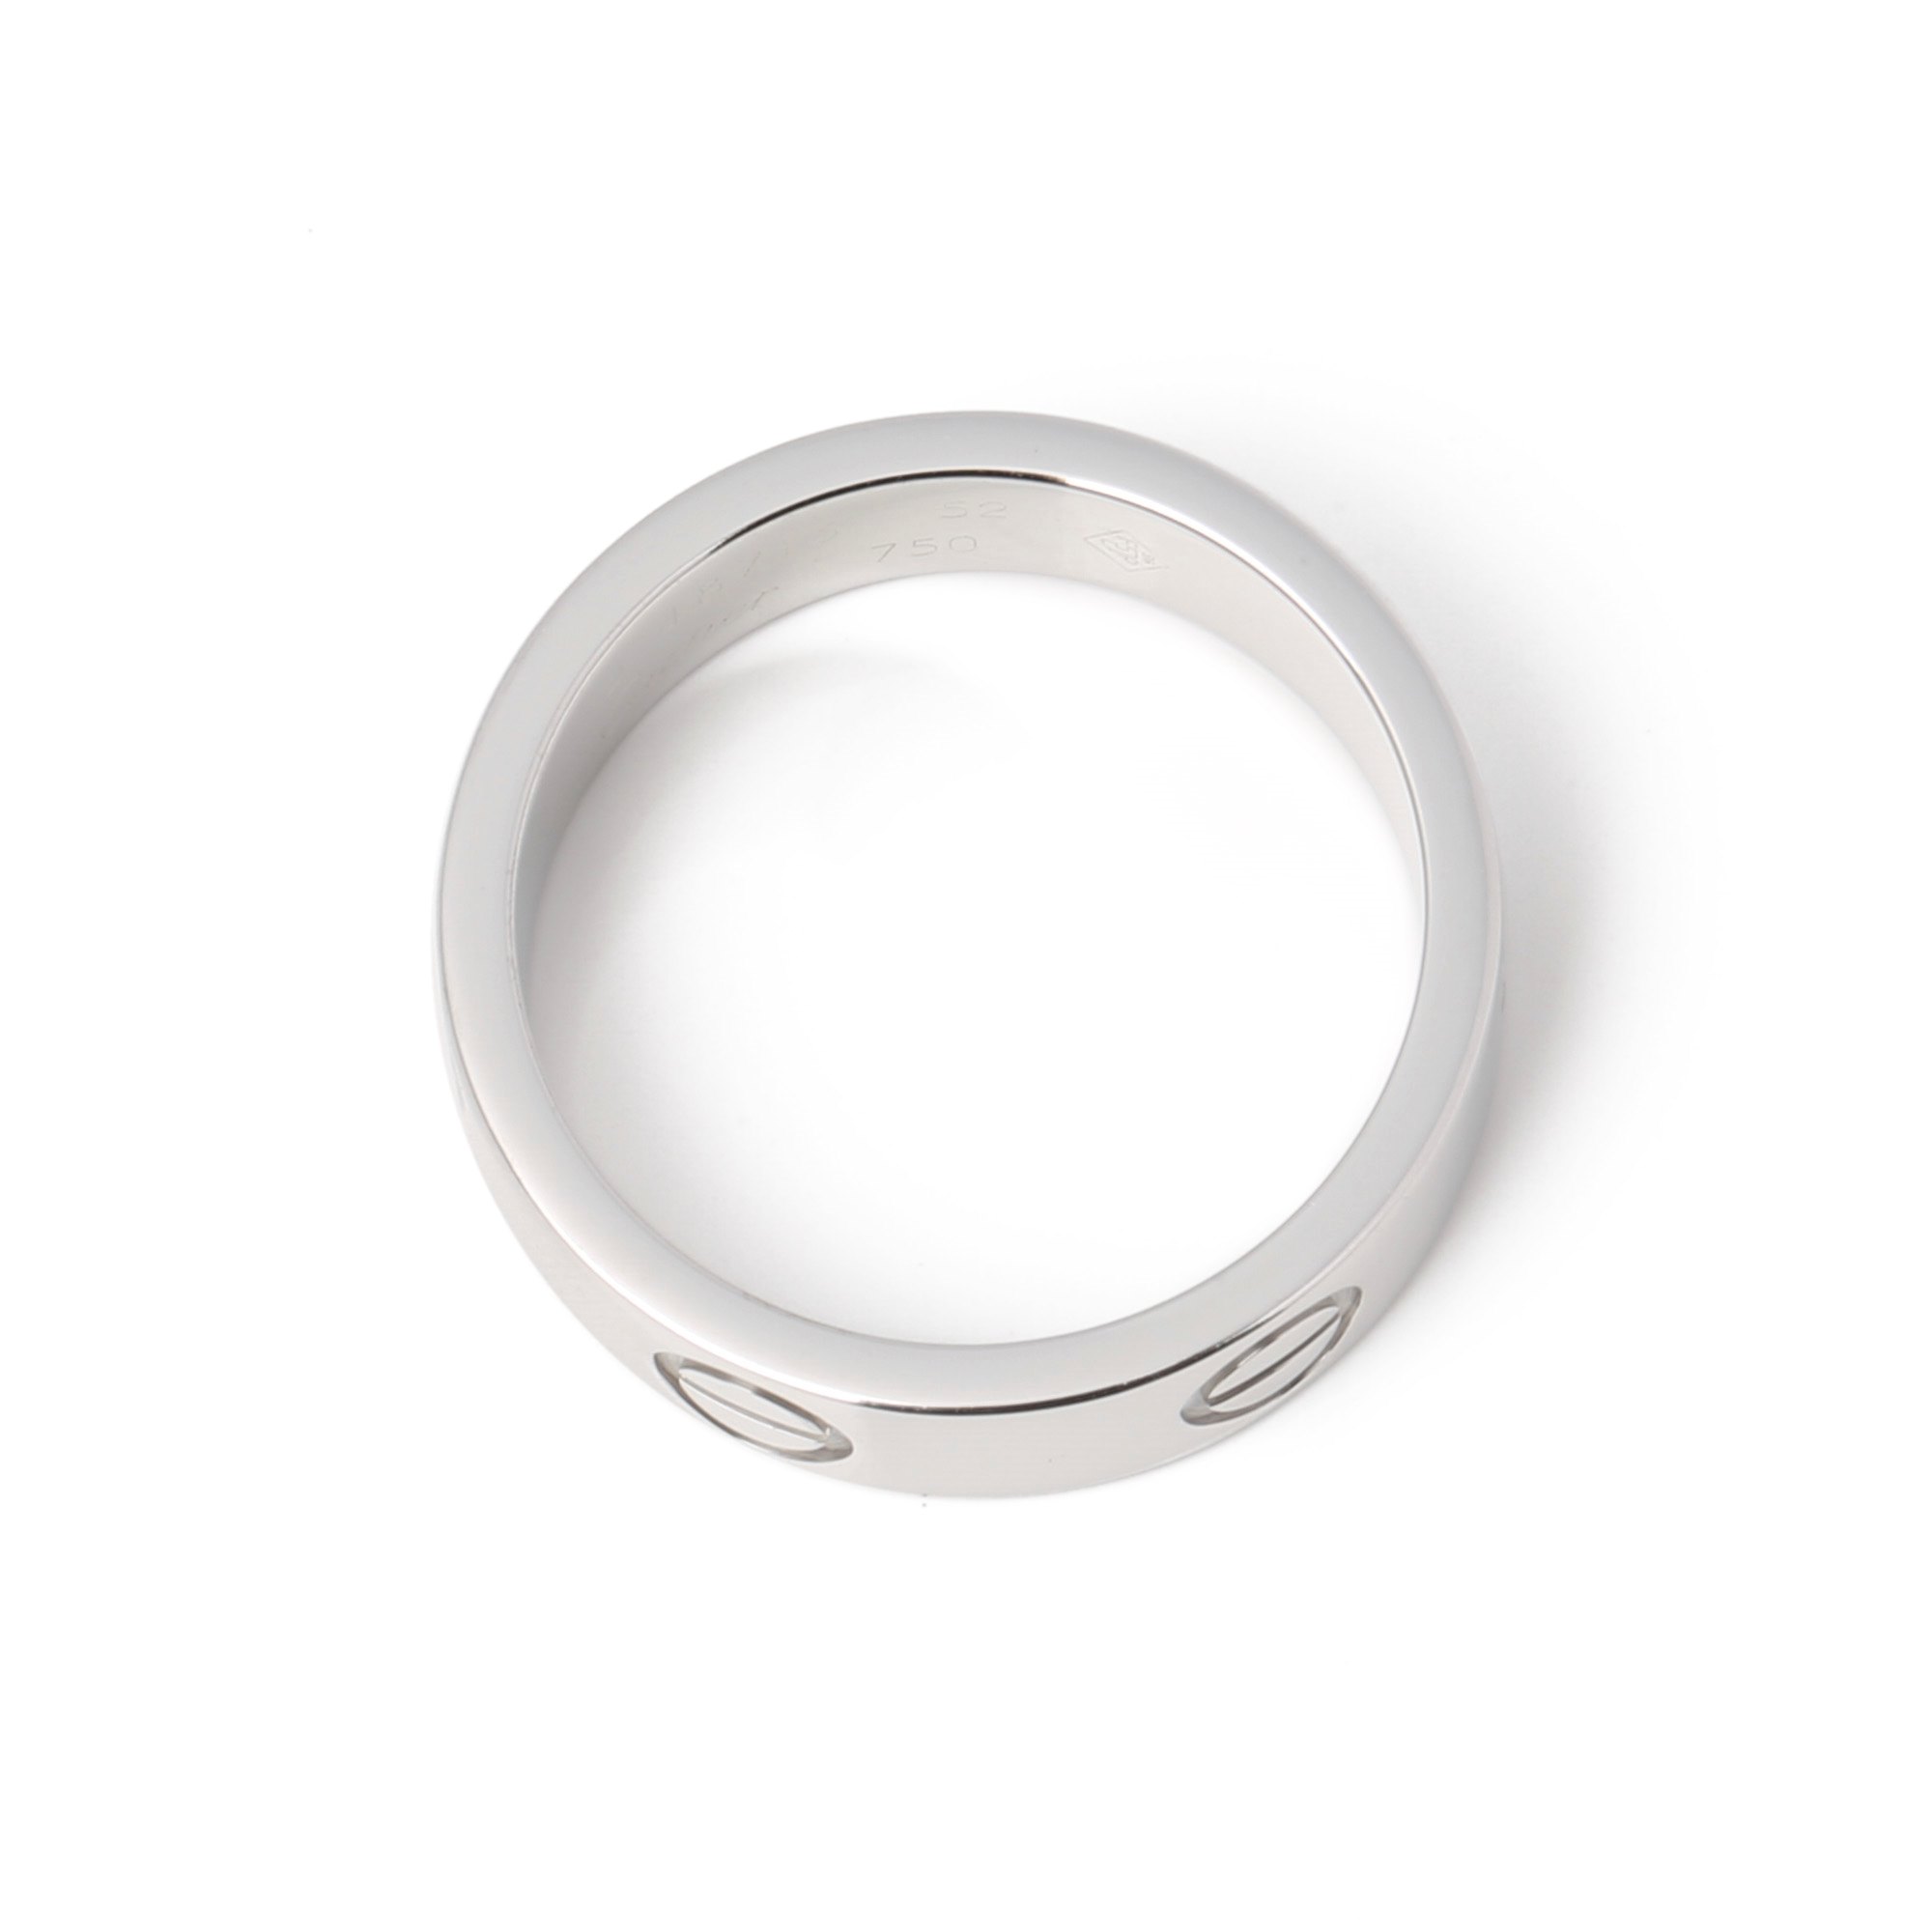 Cartier White Gold Love Ring